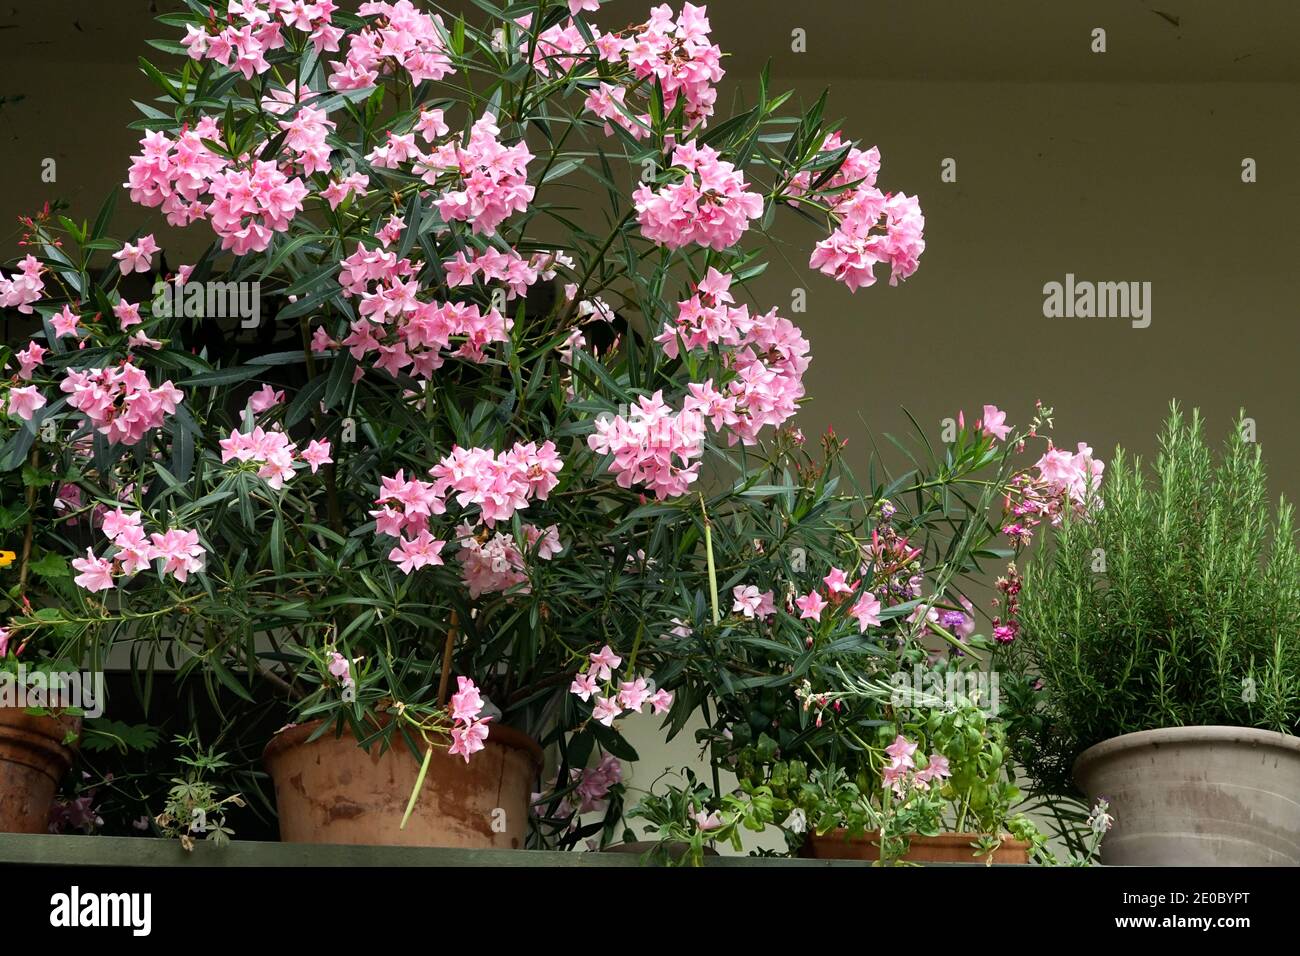 Balcony plants, pink oleander and herbs in pots Stock Photo